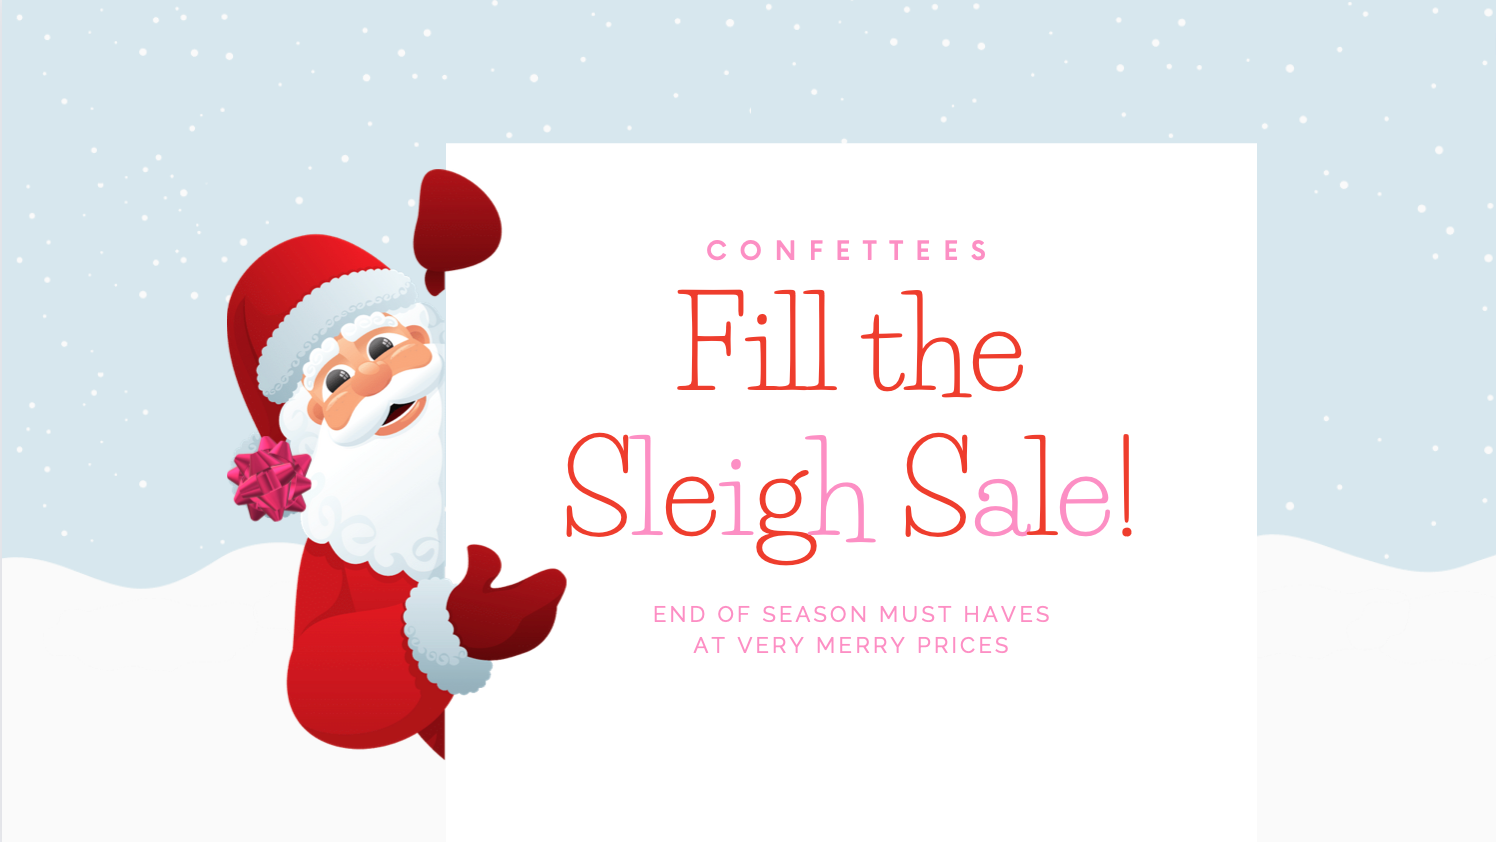 Fill the Sleigh Sale: 40% off!